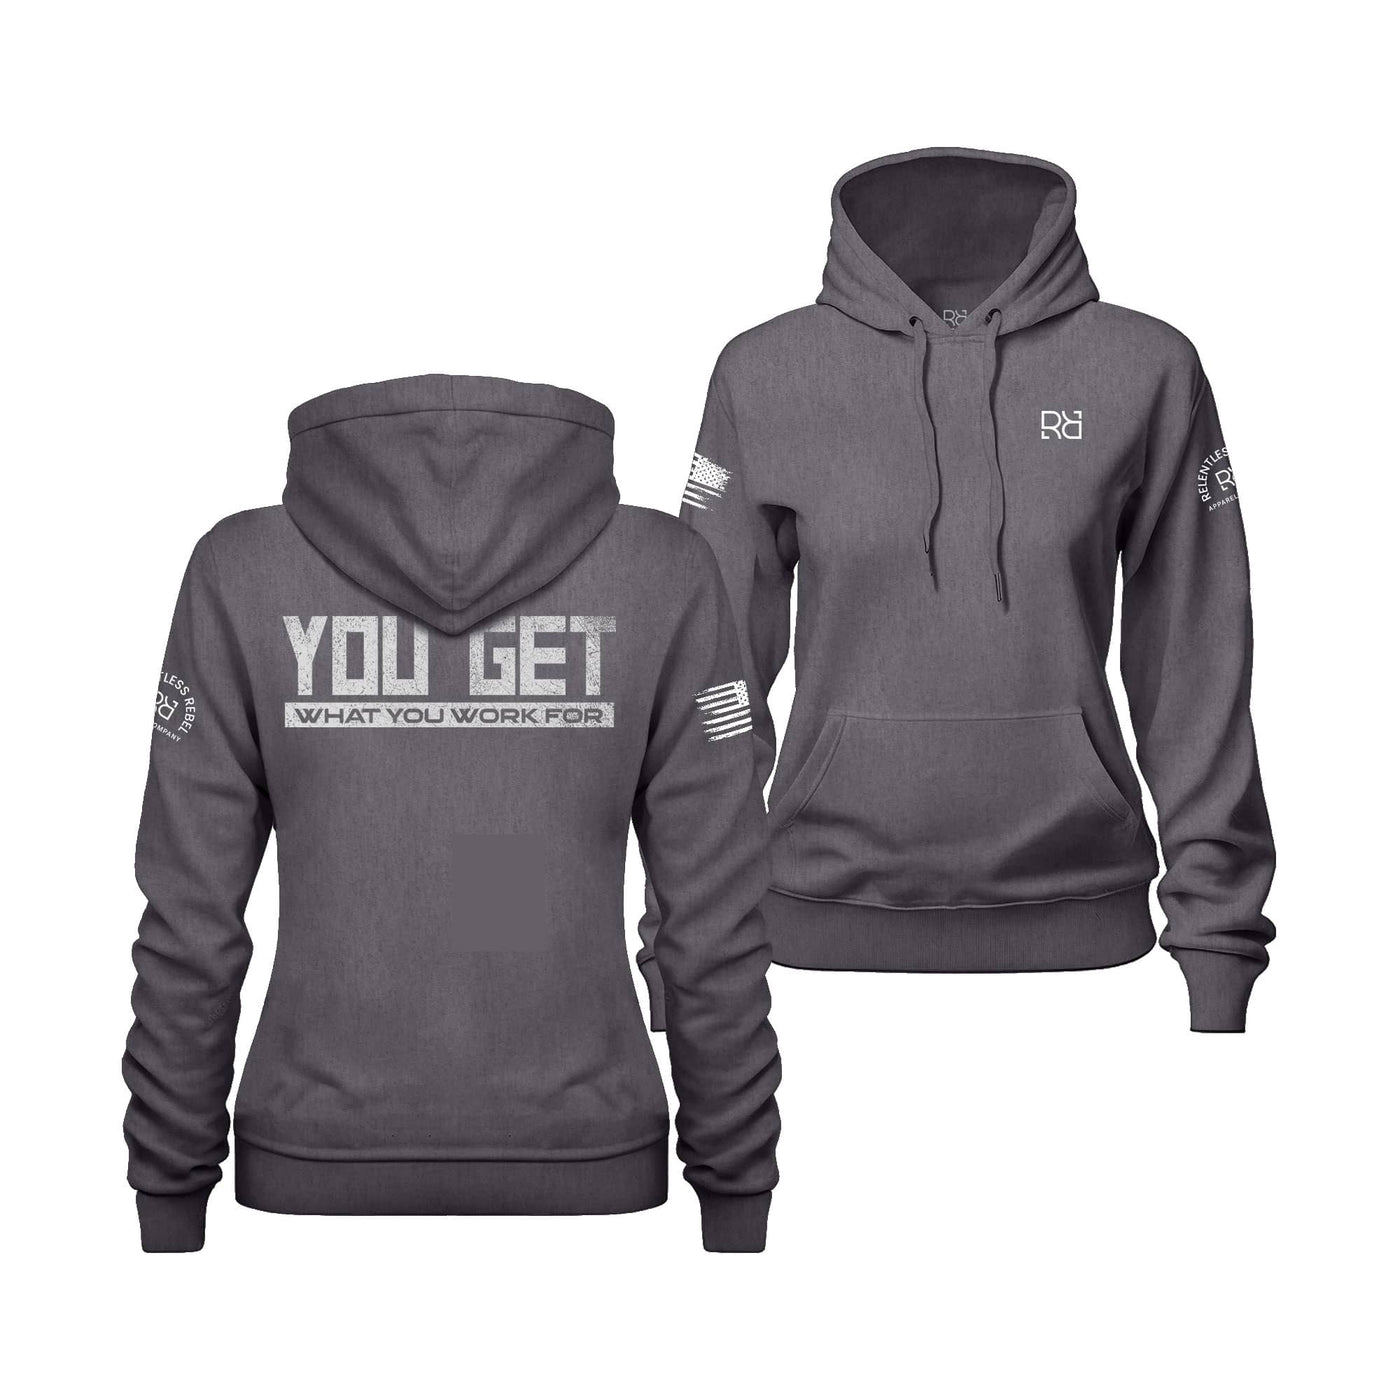 You Get What You Work For | Women's Hoodie